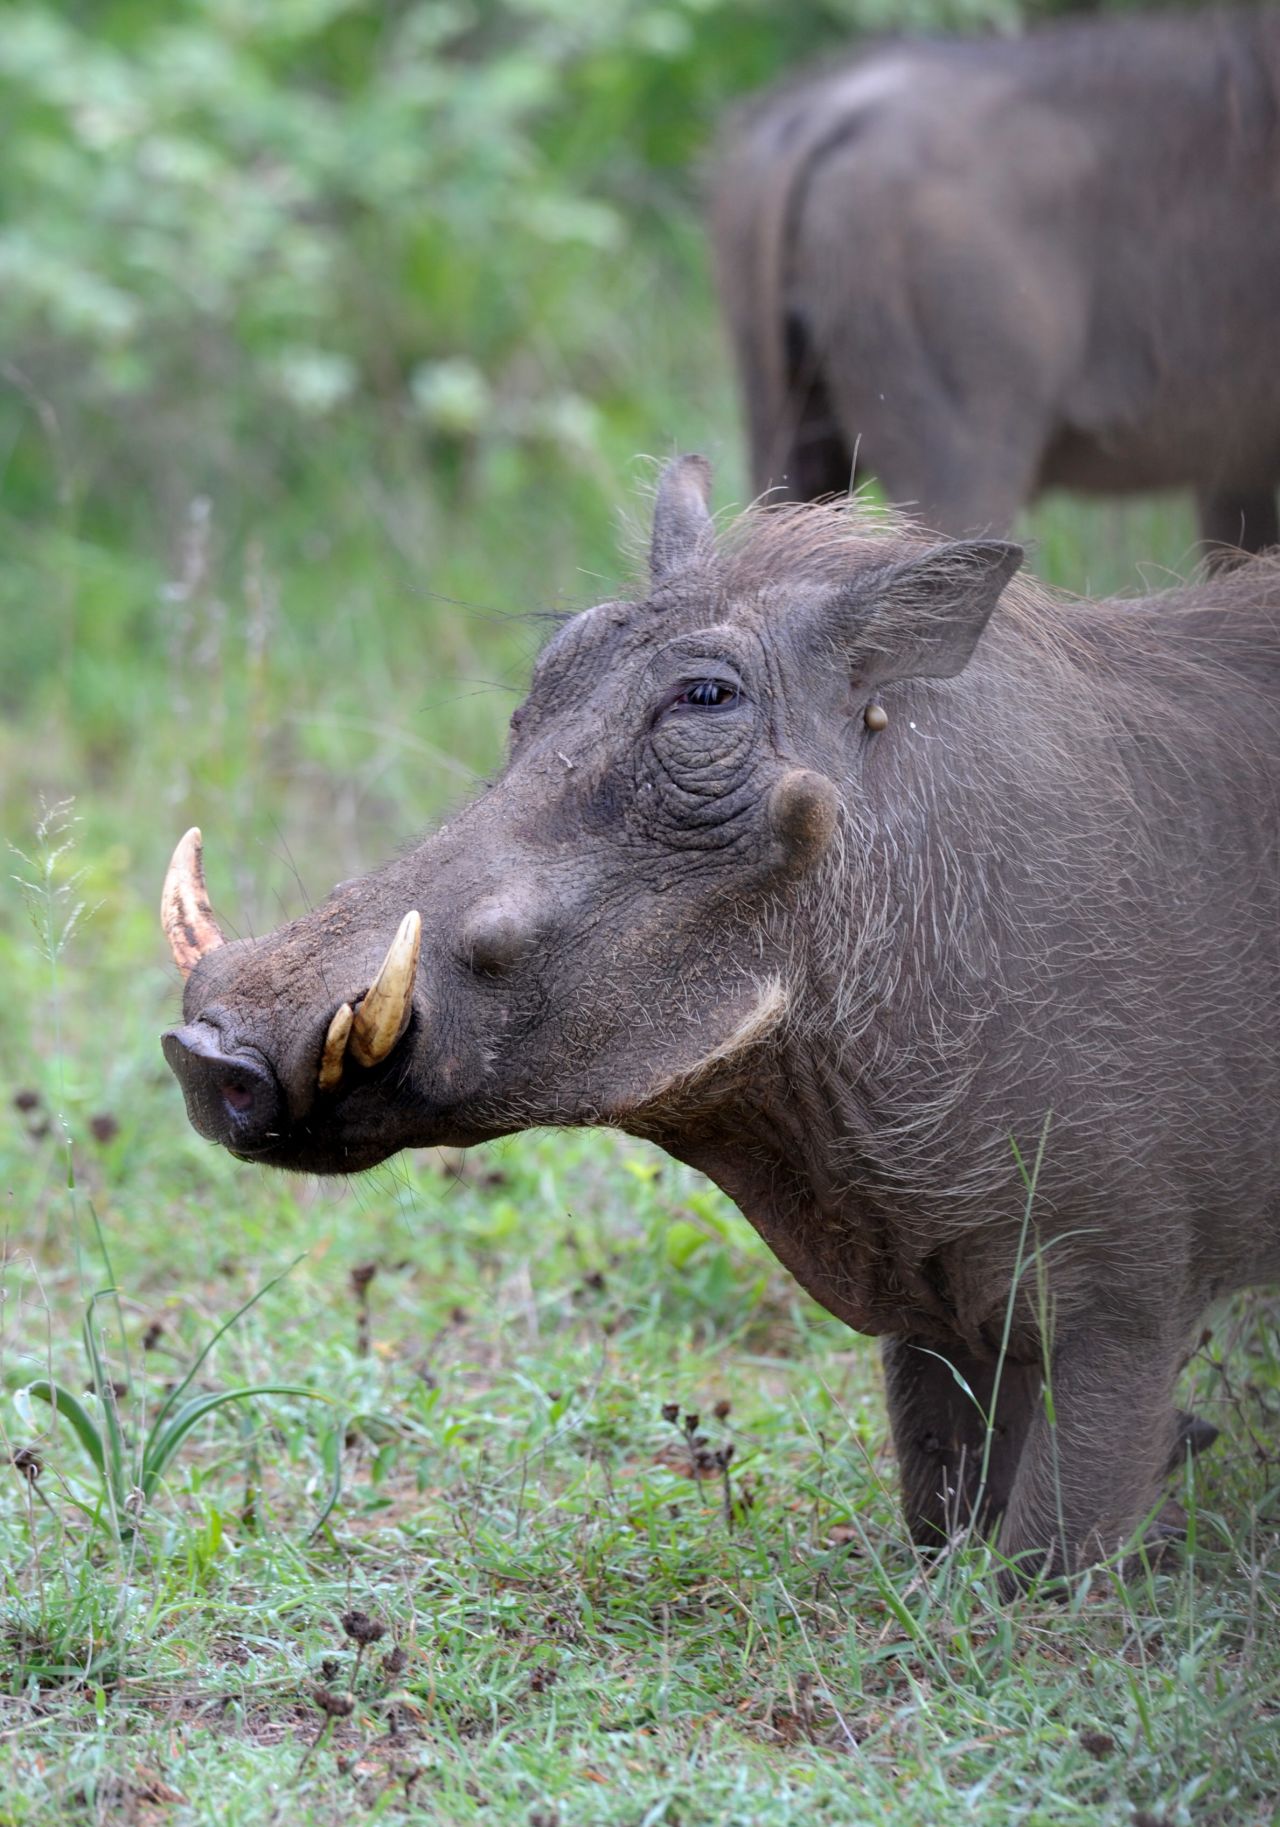 Found throughout sub-Saharan Africa, the warthog is like a weird assemblage of other animals' parts. Surely only its own mother could love it ... but even then.